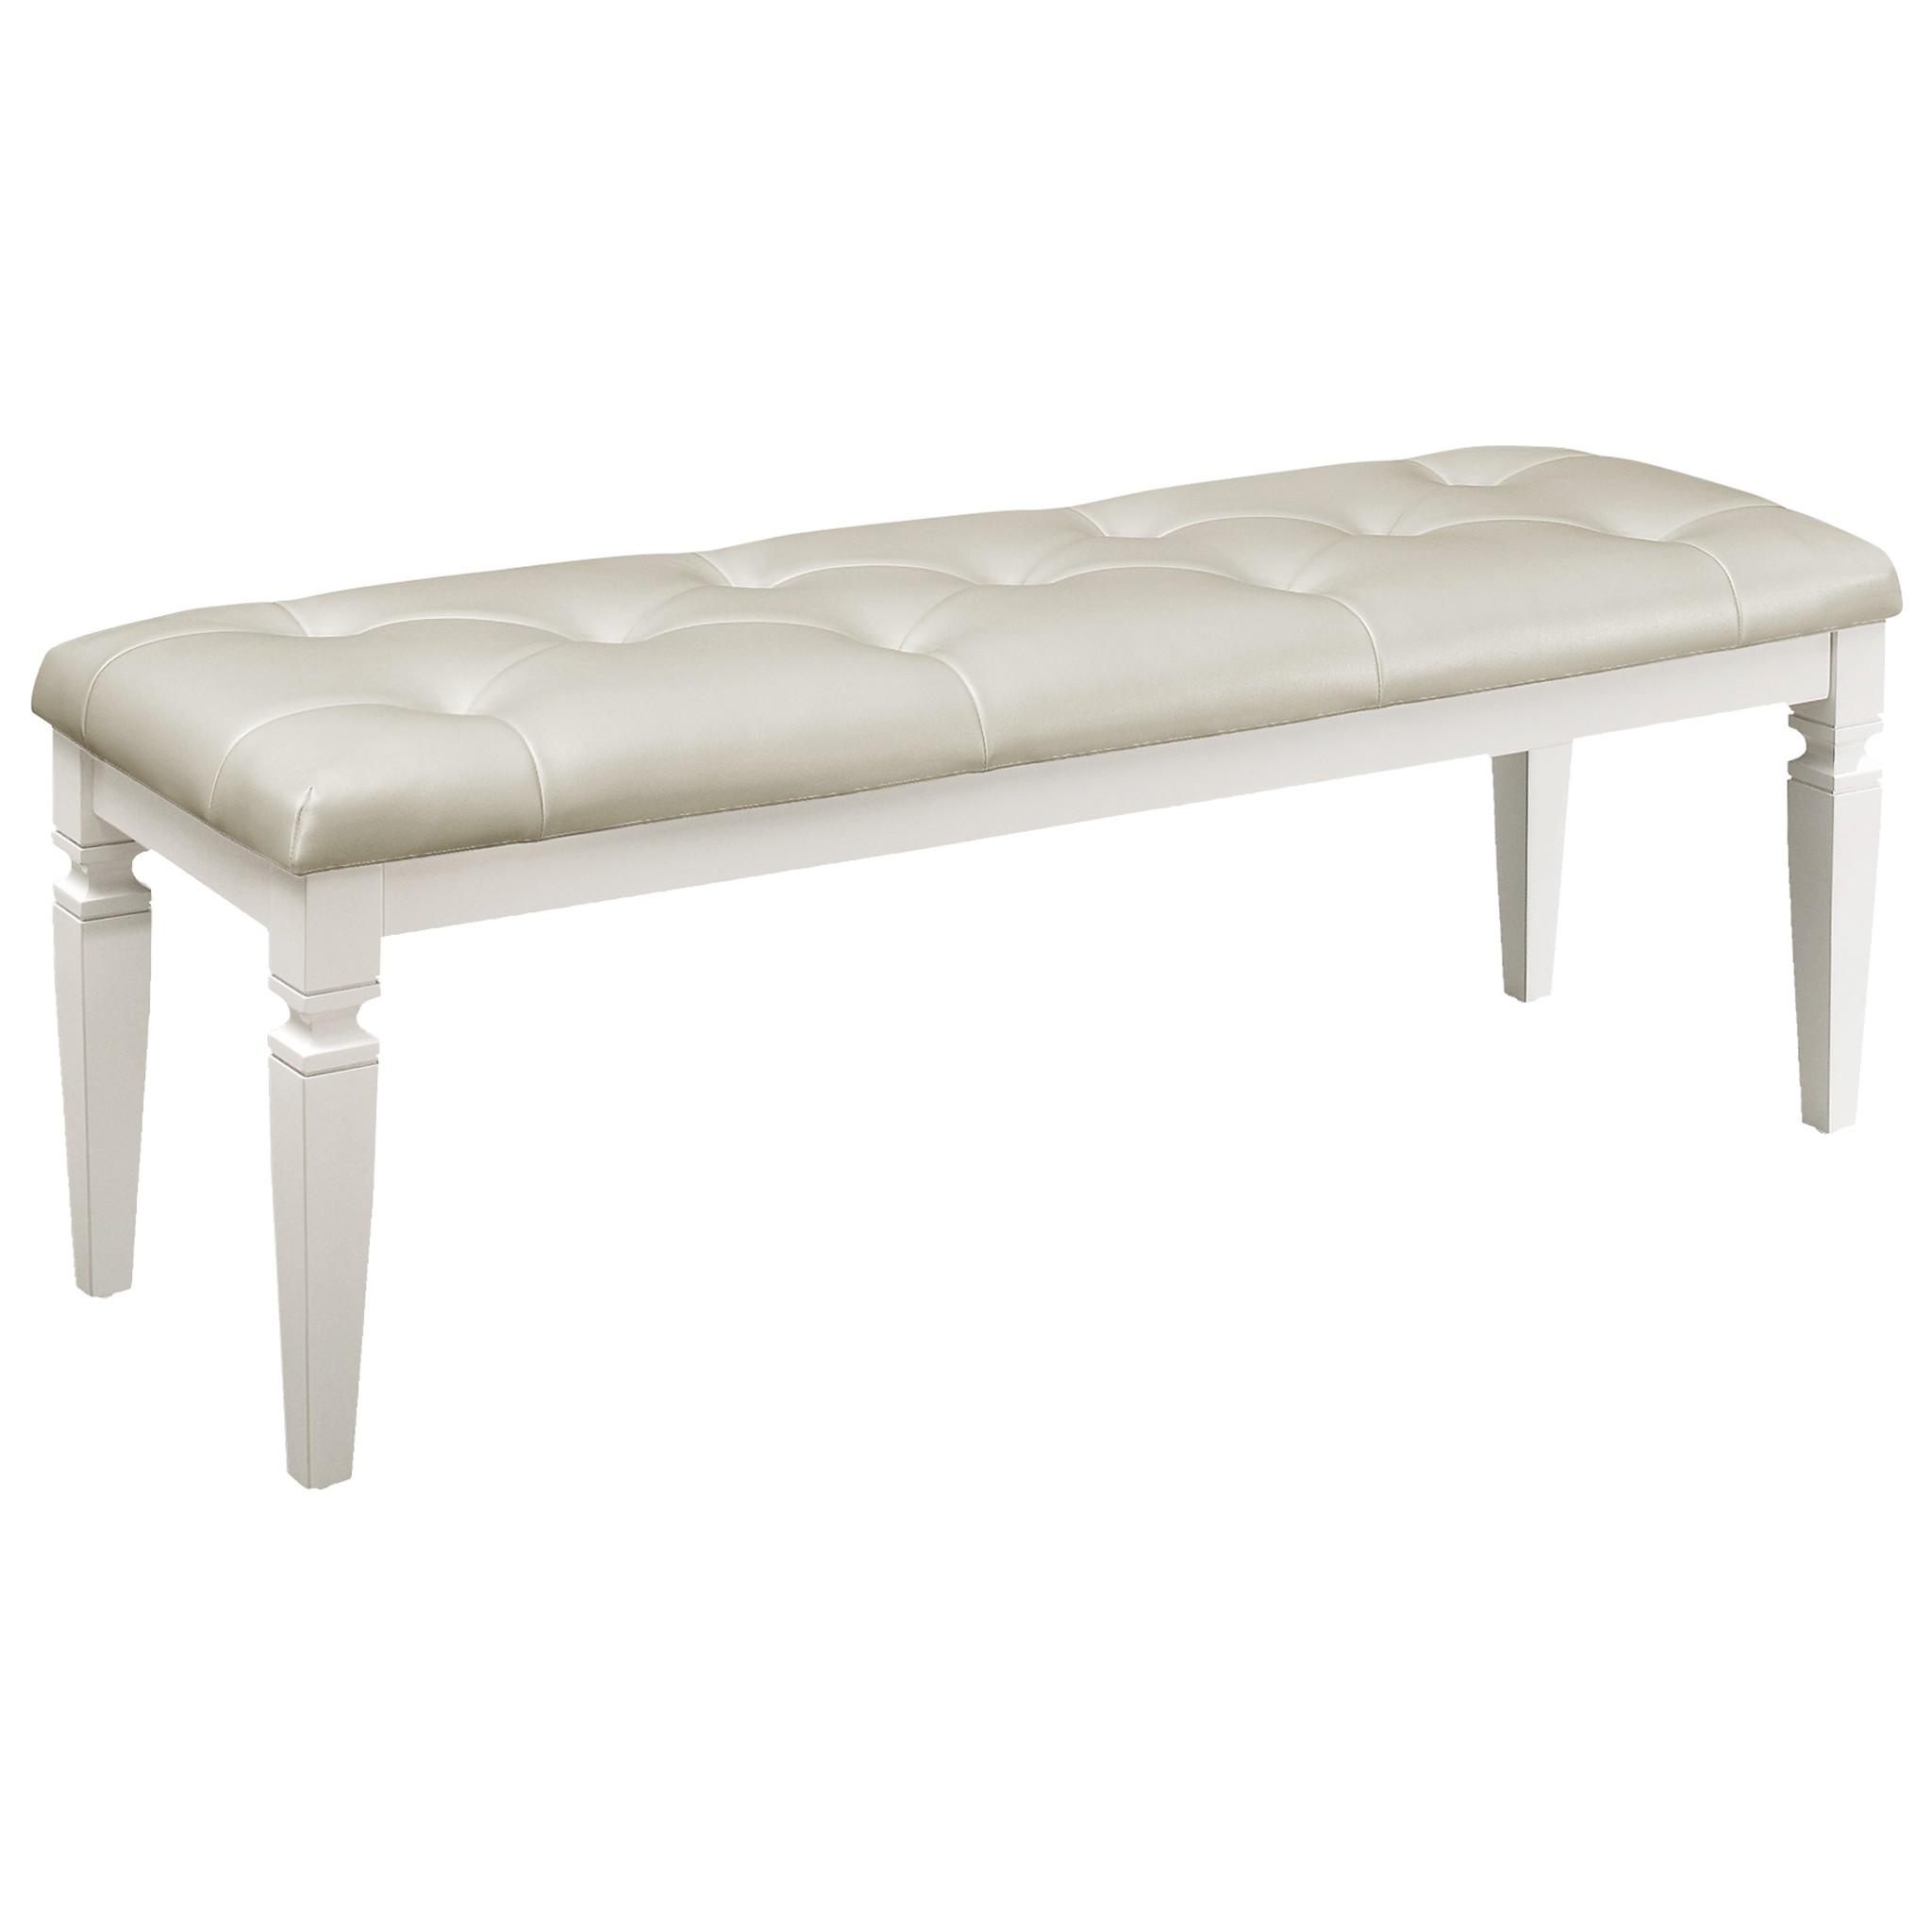 Homelegance 1916W-FBH Allura Bed Bench